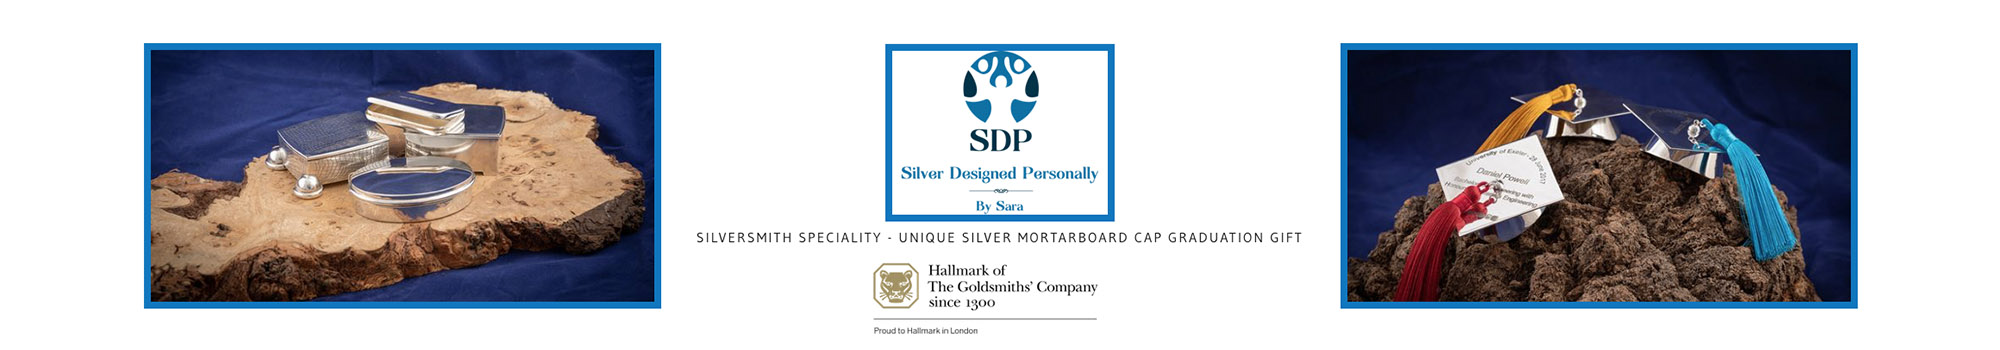 Silver Designed Personally banner image